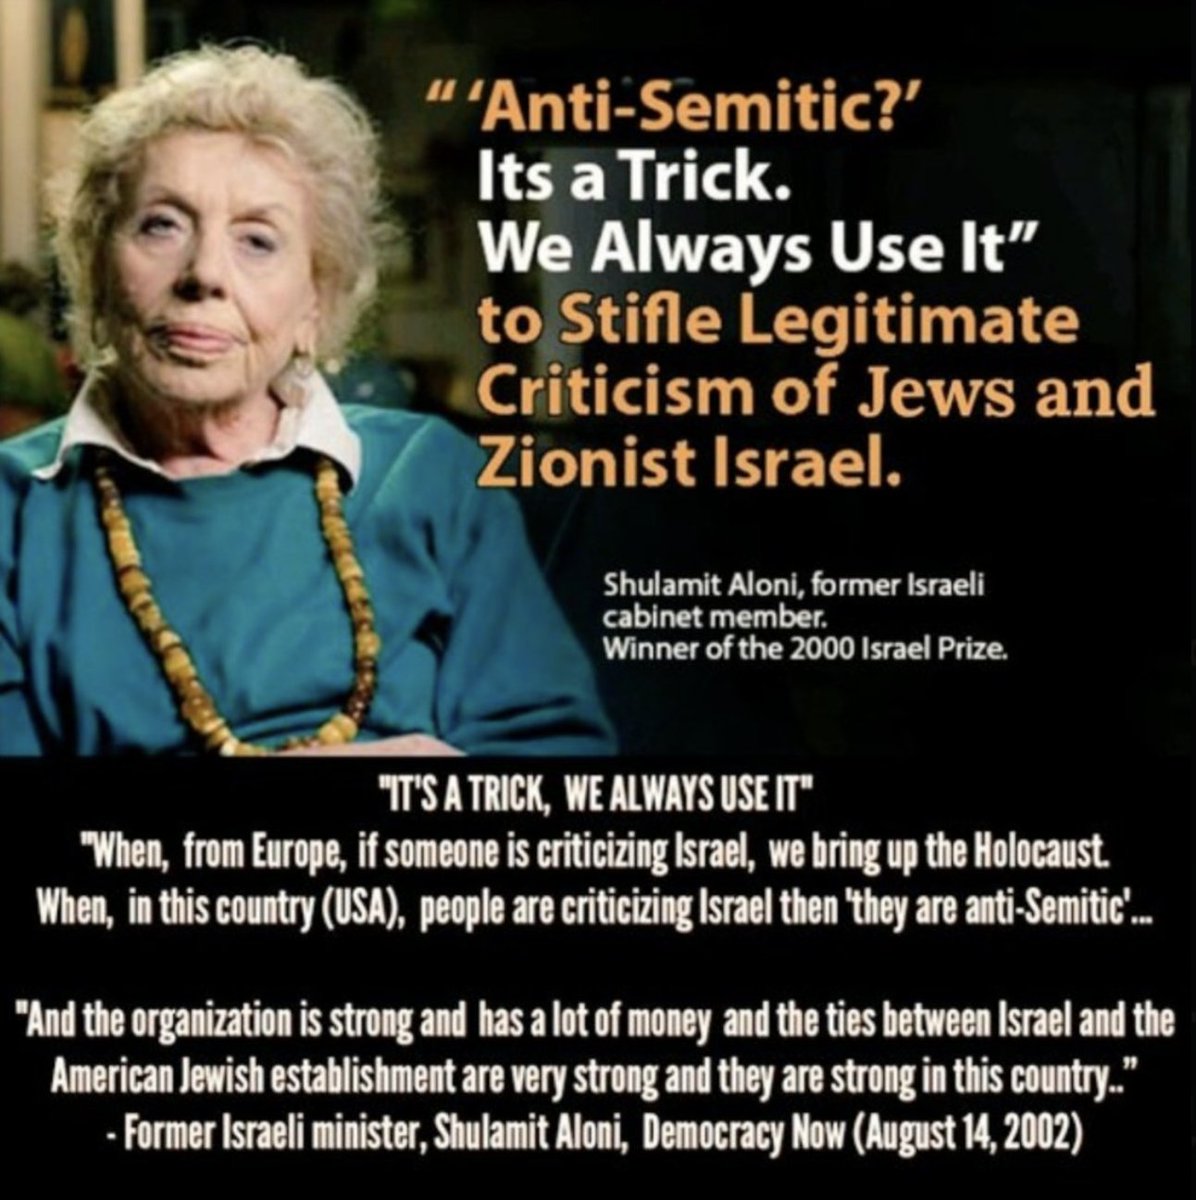 @Israel #Israel is a criminal entity created by European #Zionists to thieve land, oil and gas using #Antisemitism to condemn any #Resistance